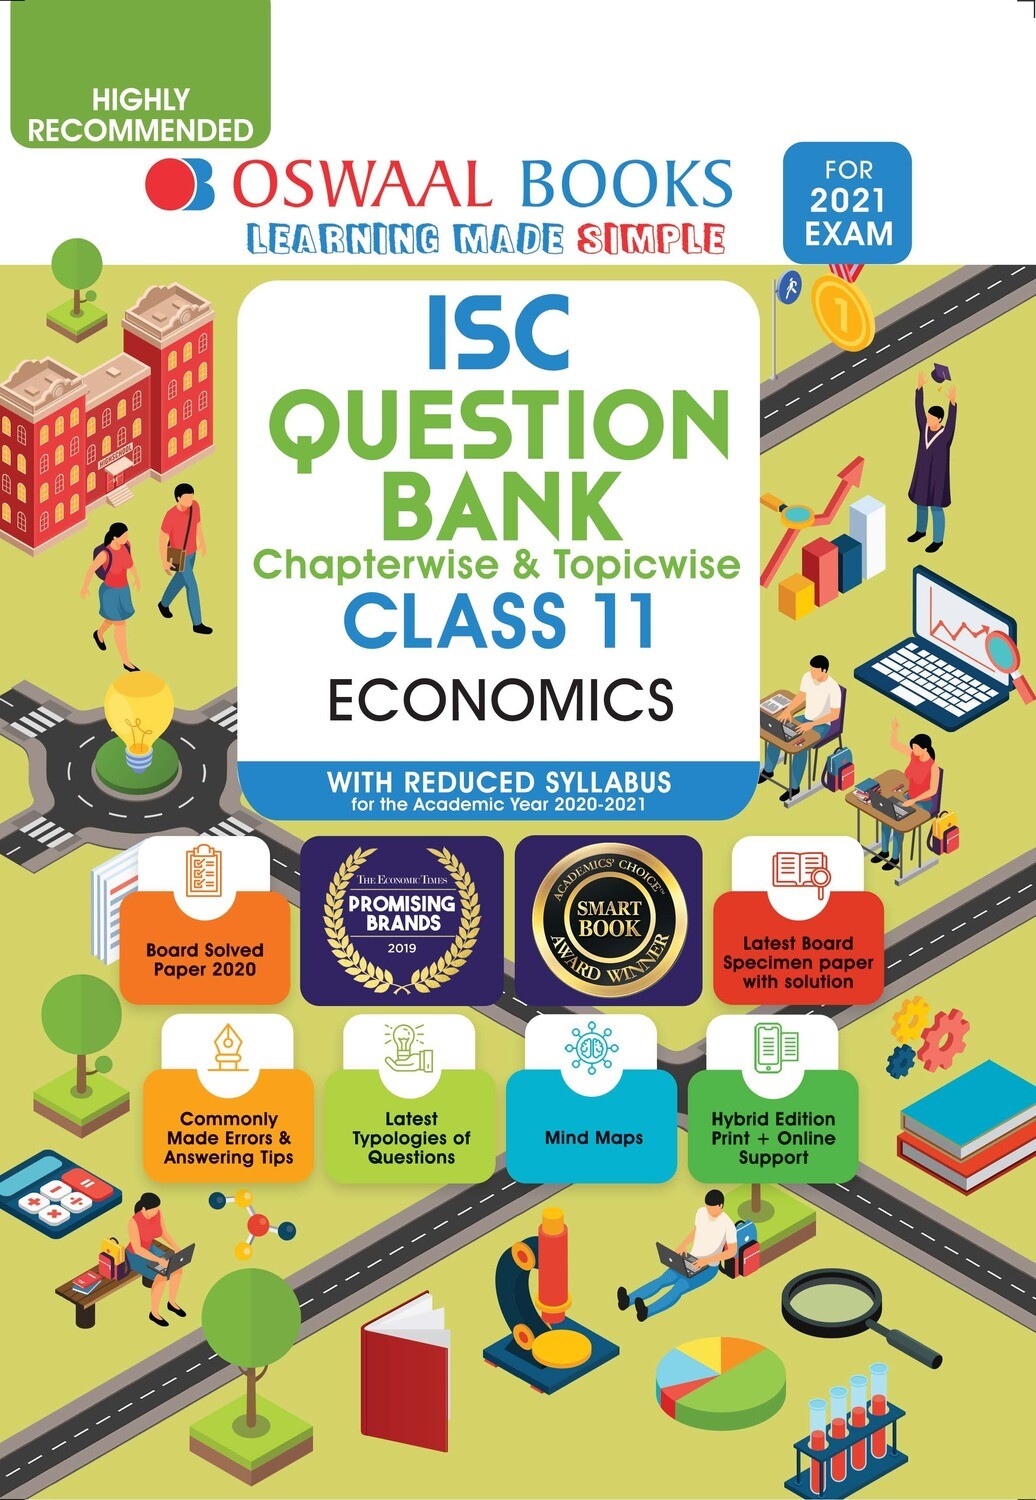 Buy e-book: Oswaal ISC Question Banks Class 11 Economics (Reduced Syllabus) (For 2021 Exam)